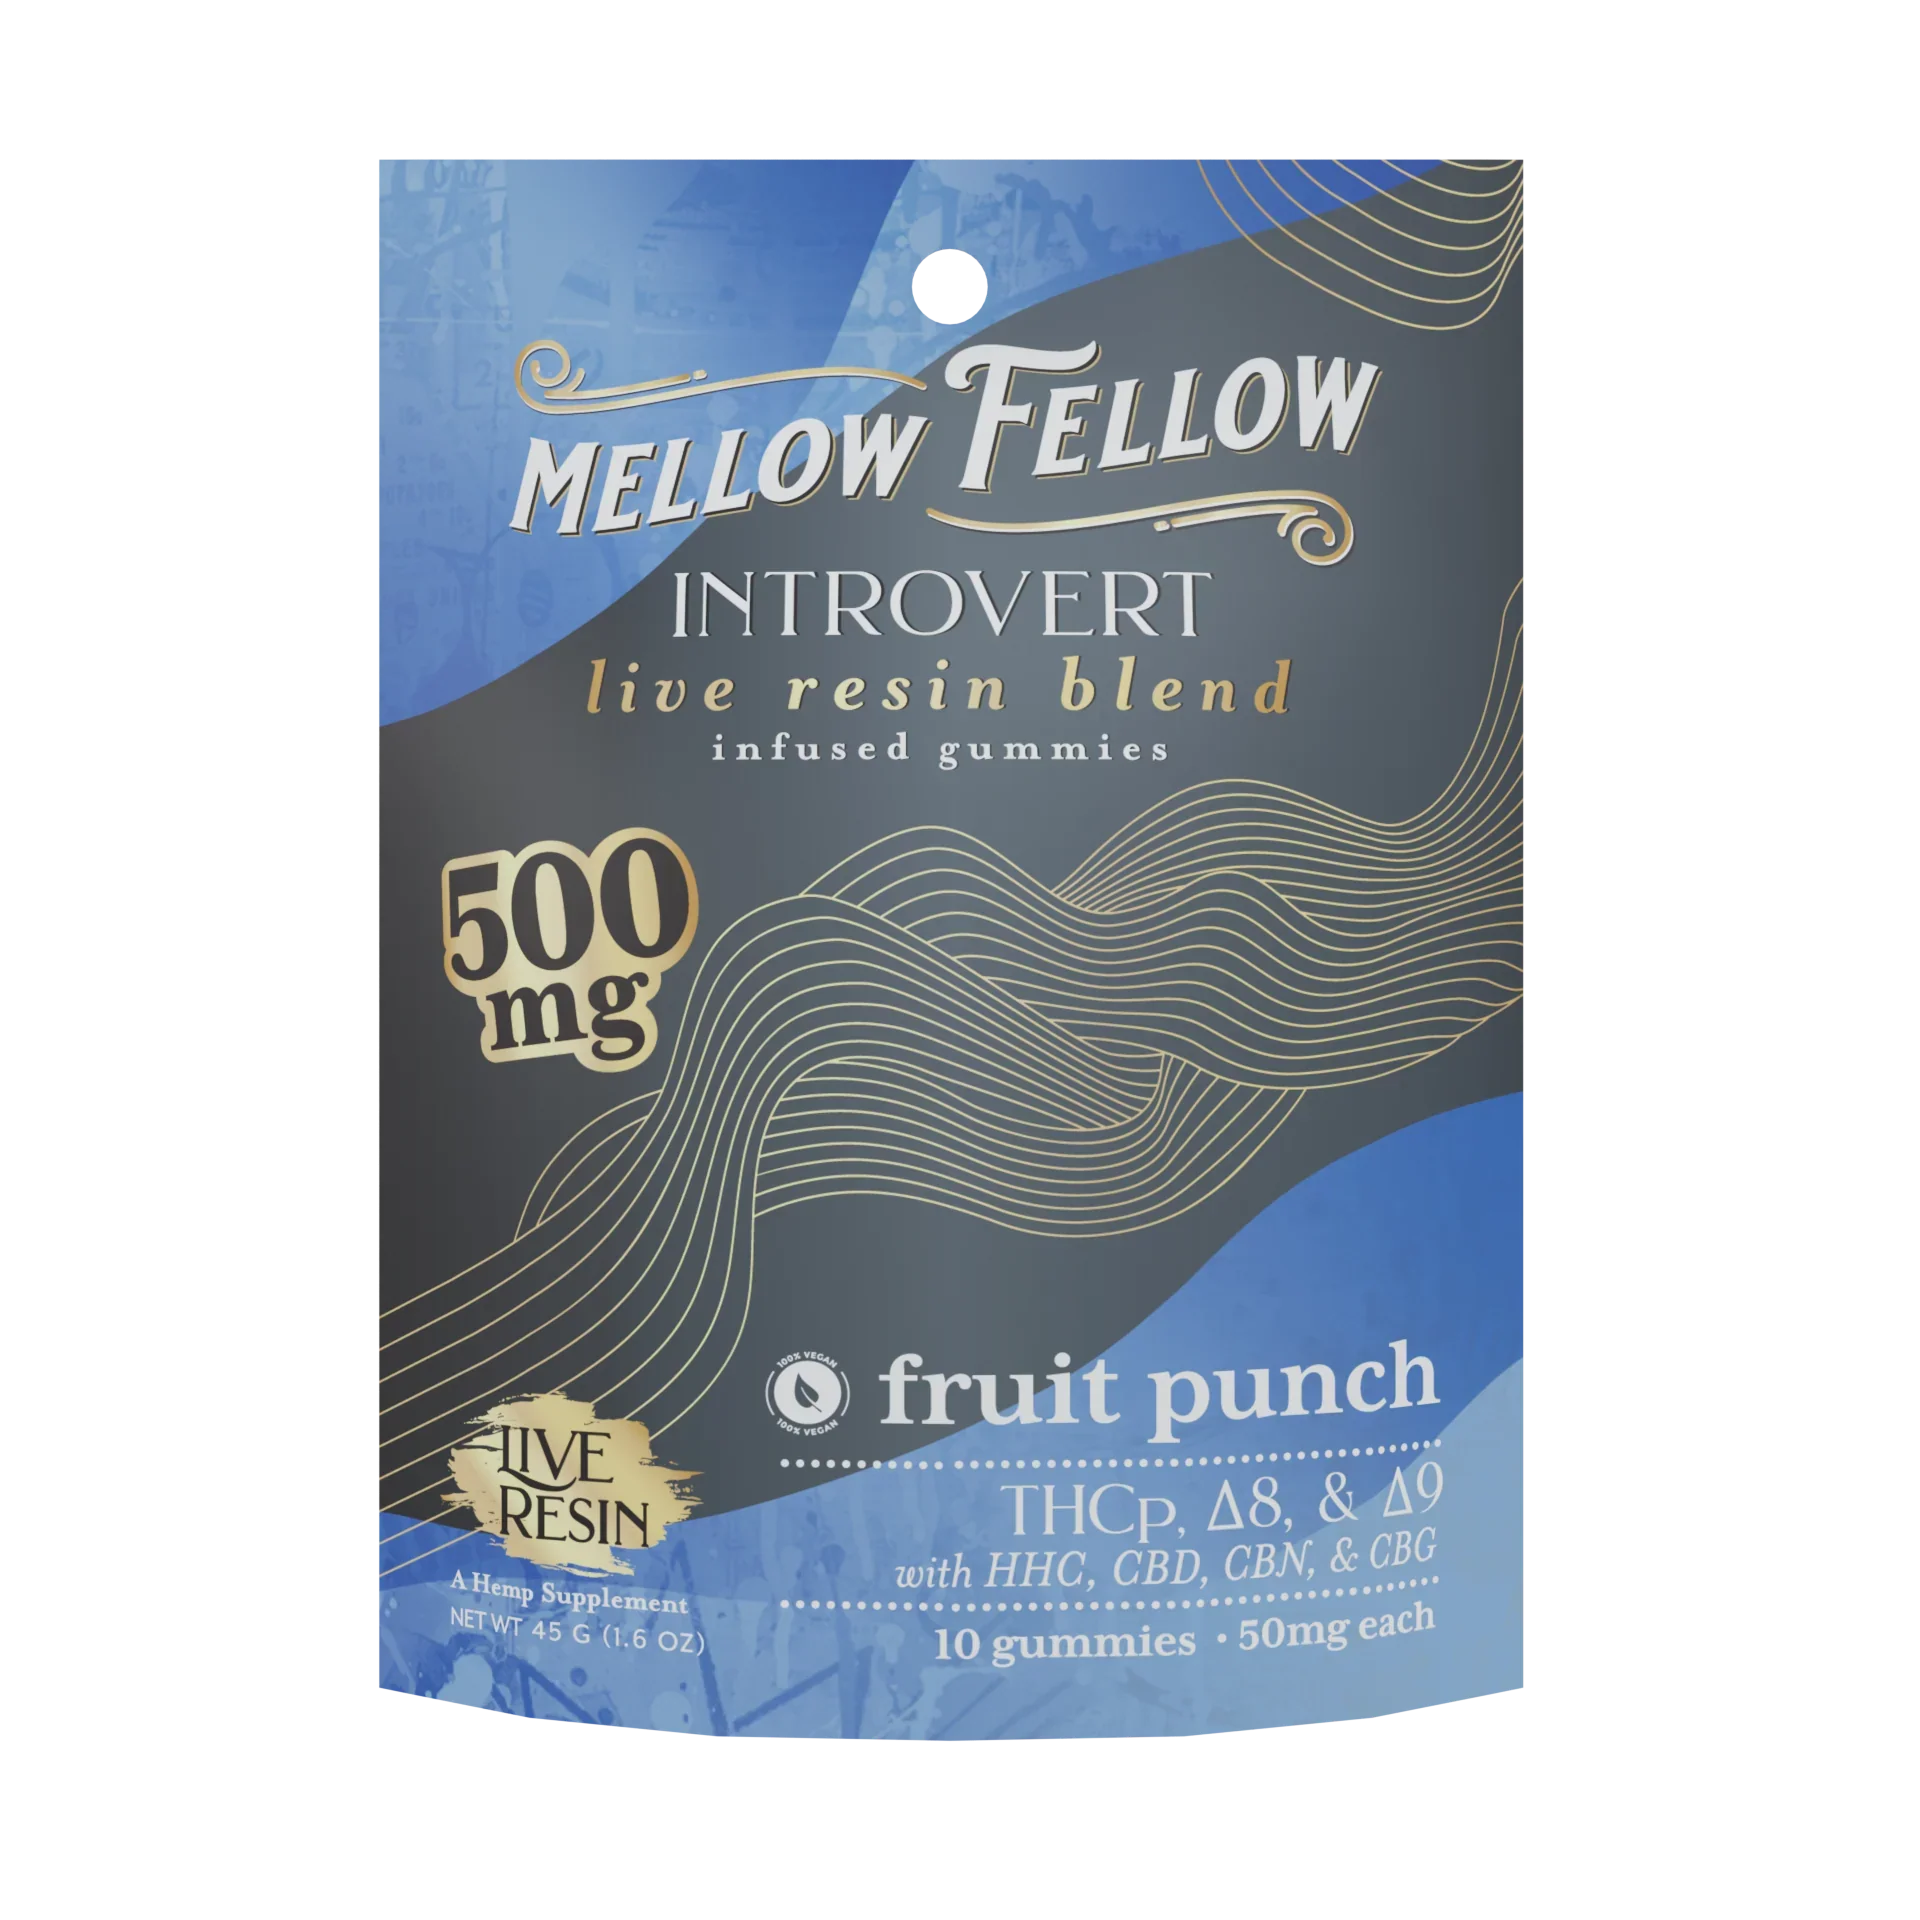 Mellow Fellow Introvert Blend Live Resin M-Fusions Edibles Fruit Punch 500mg Best Price